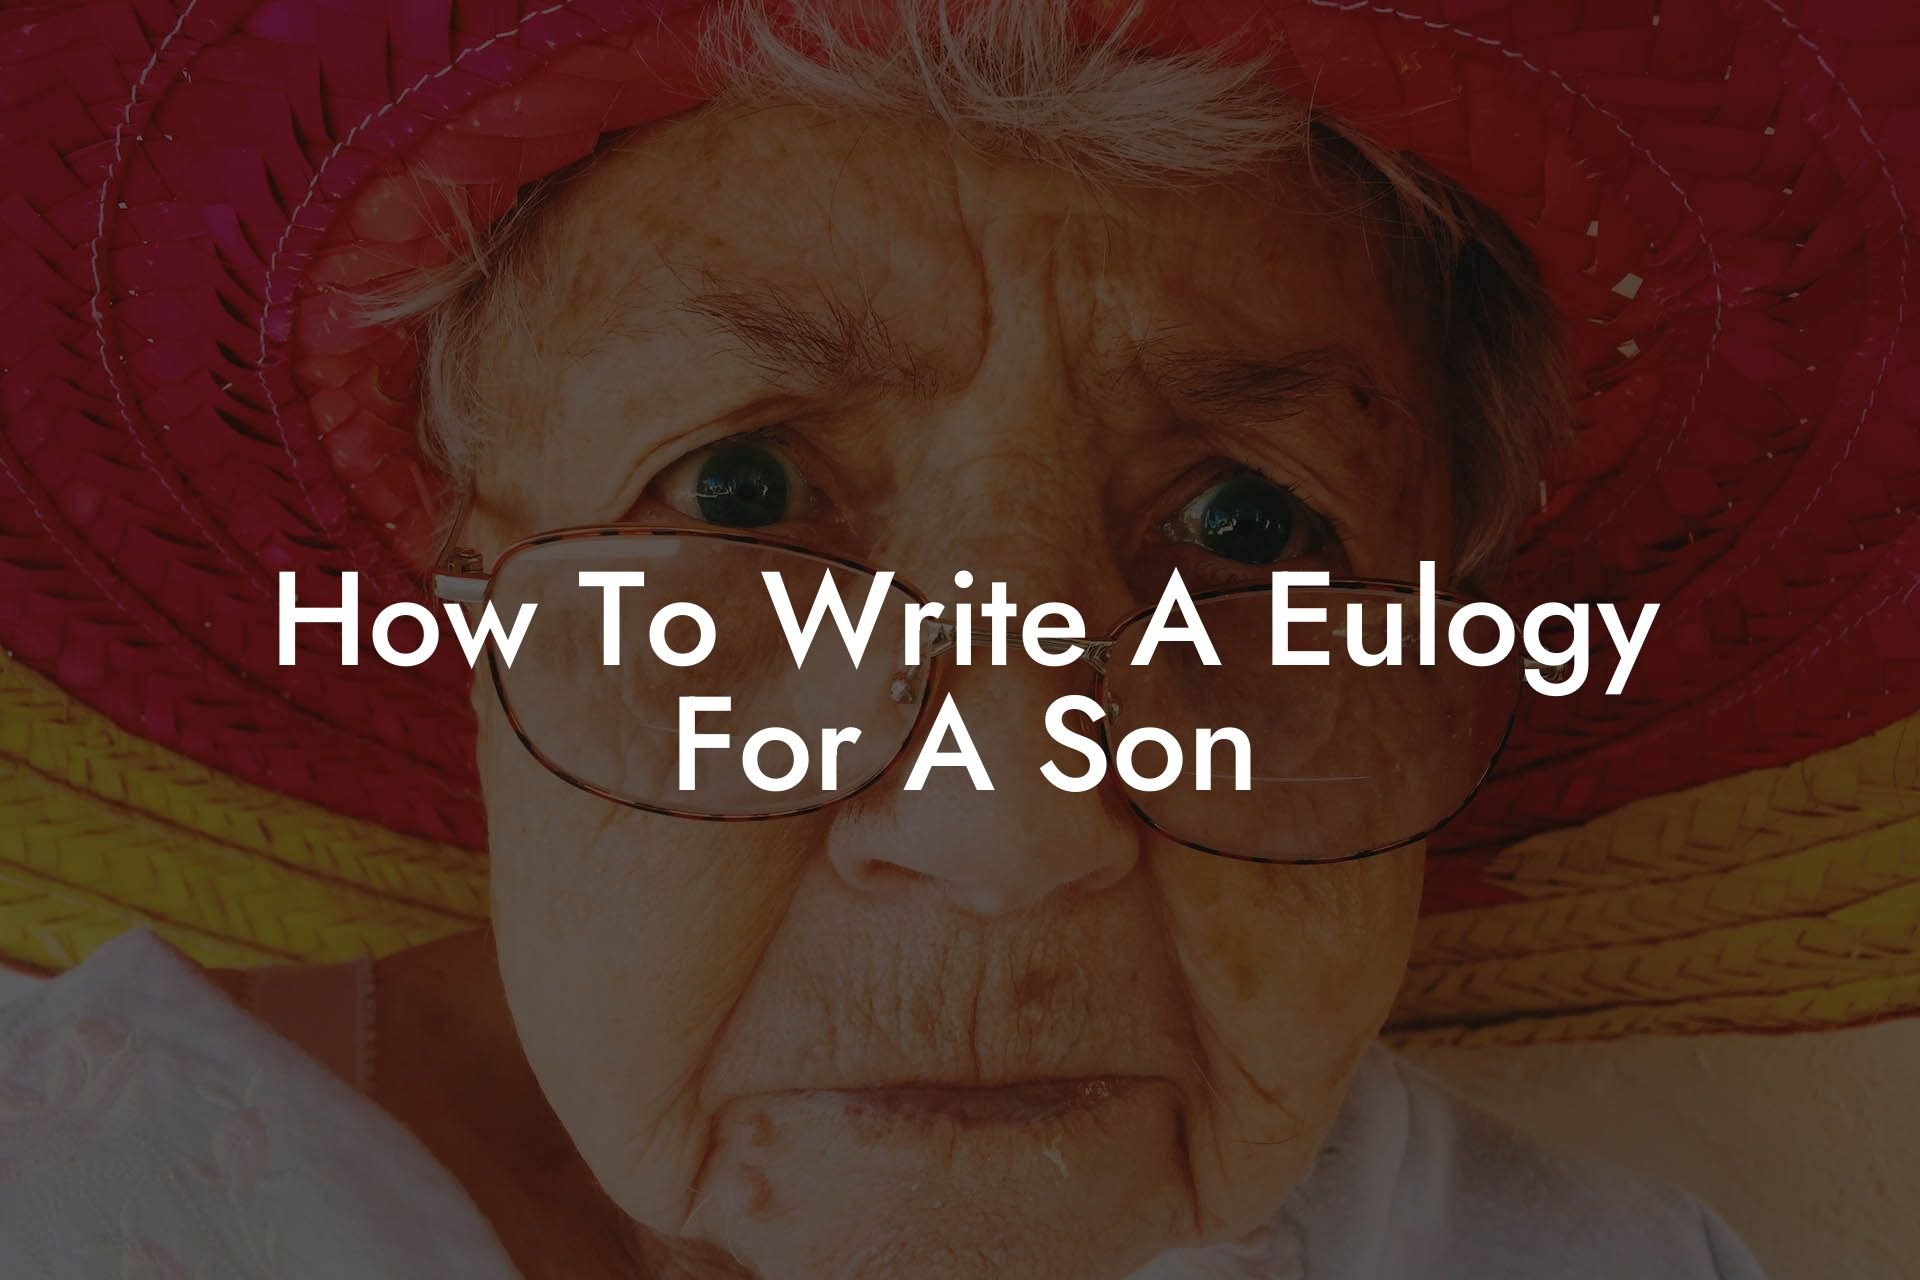 How To Write A Eulogy For A Son